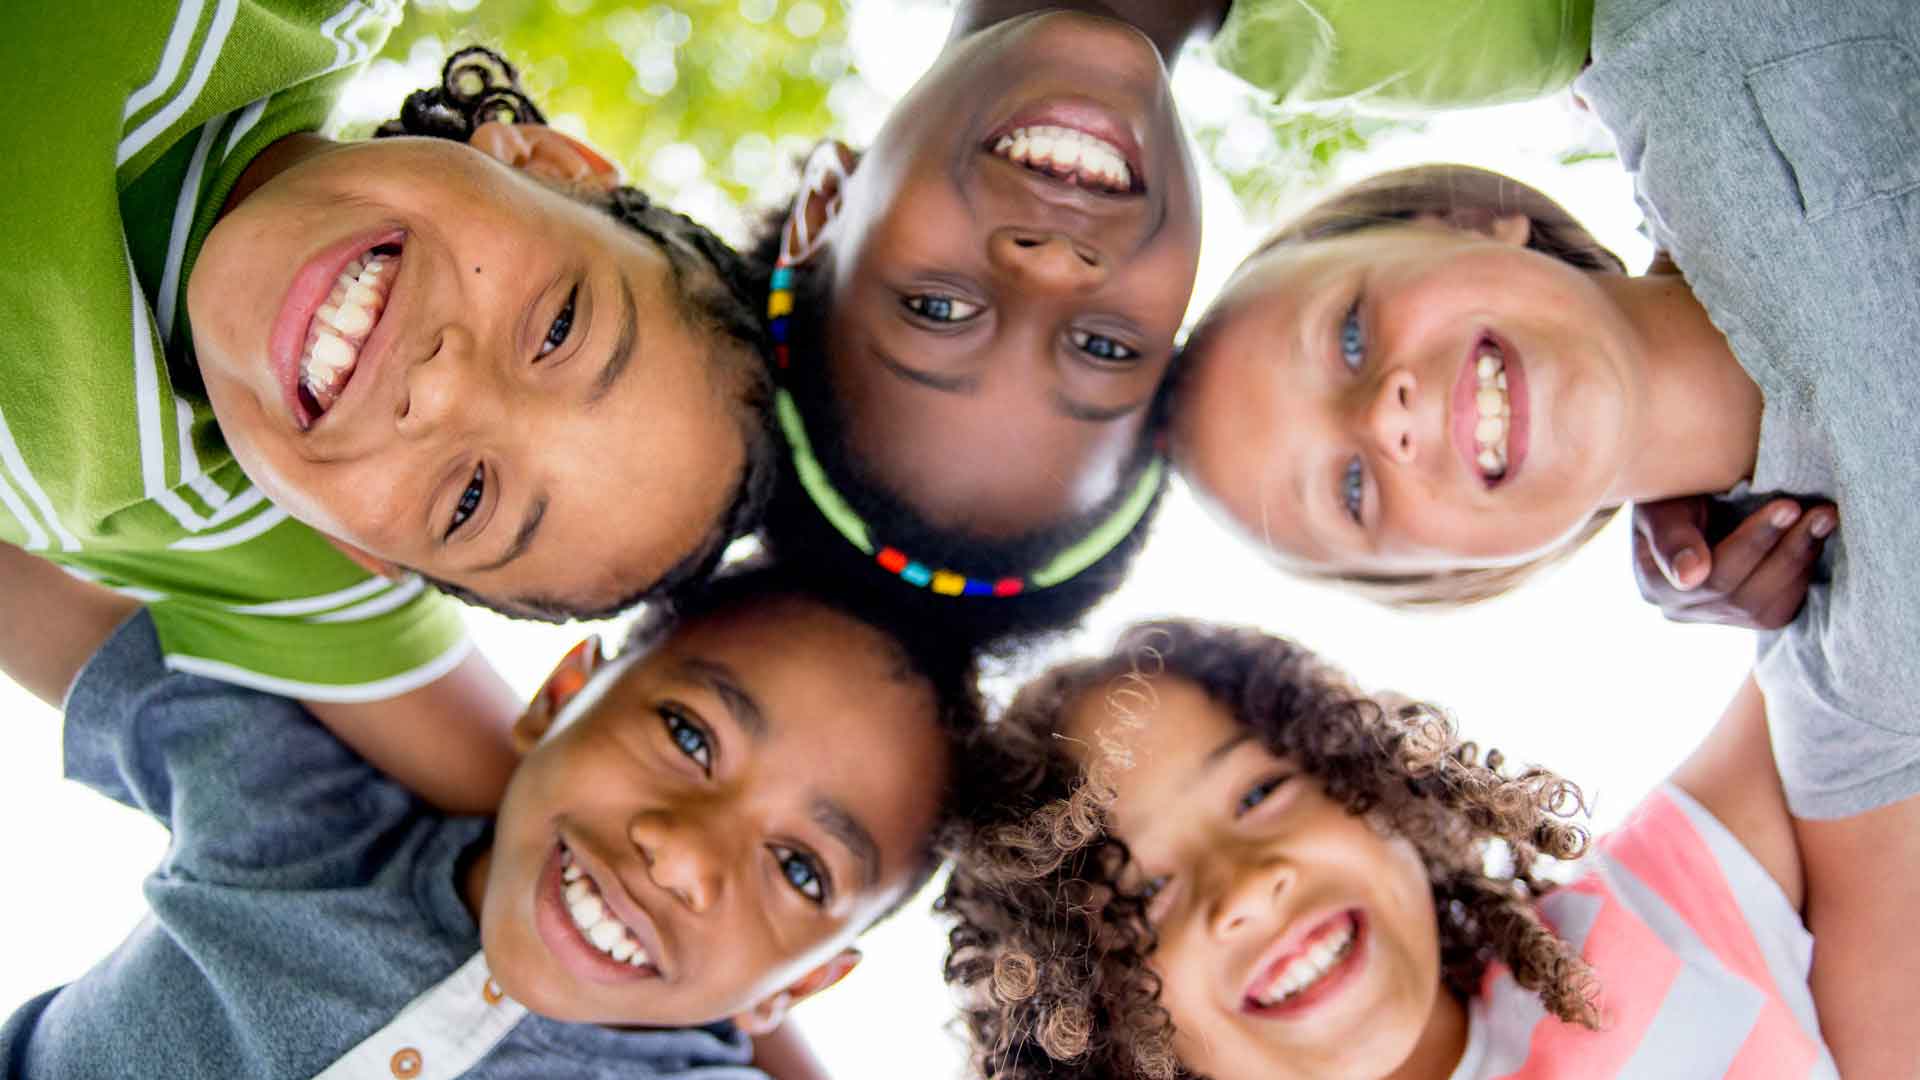 Upward view of five children from different ethnicities in a circle smiling for the camera.